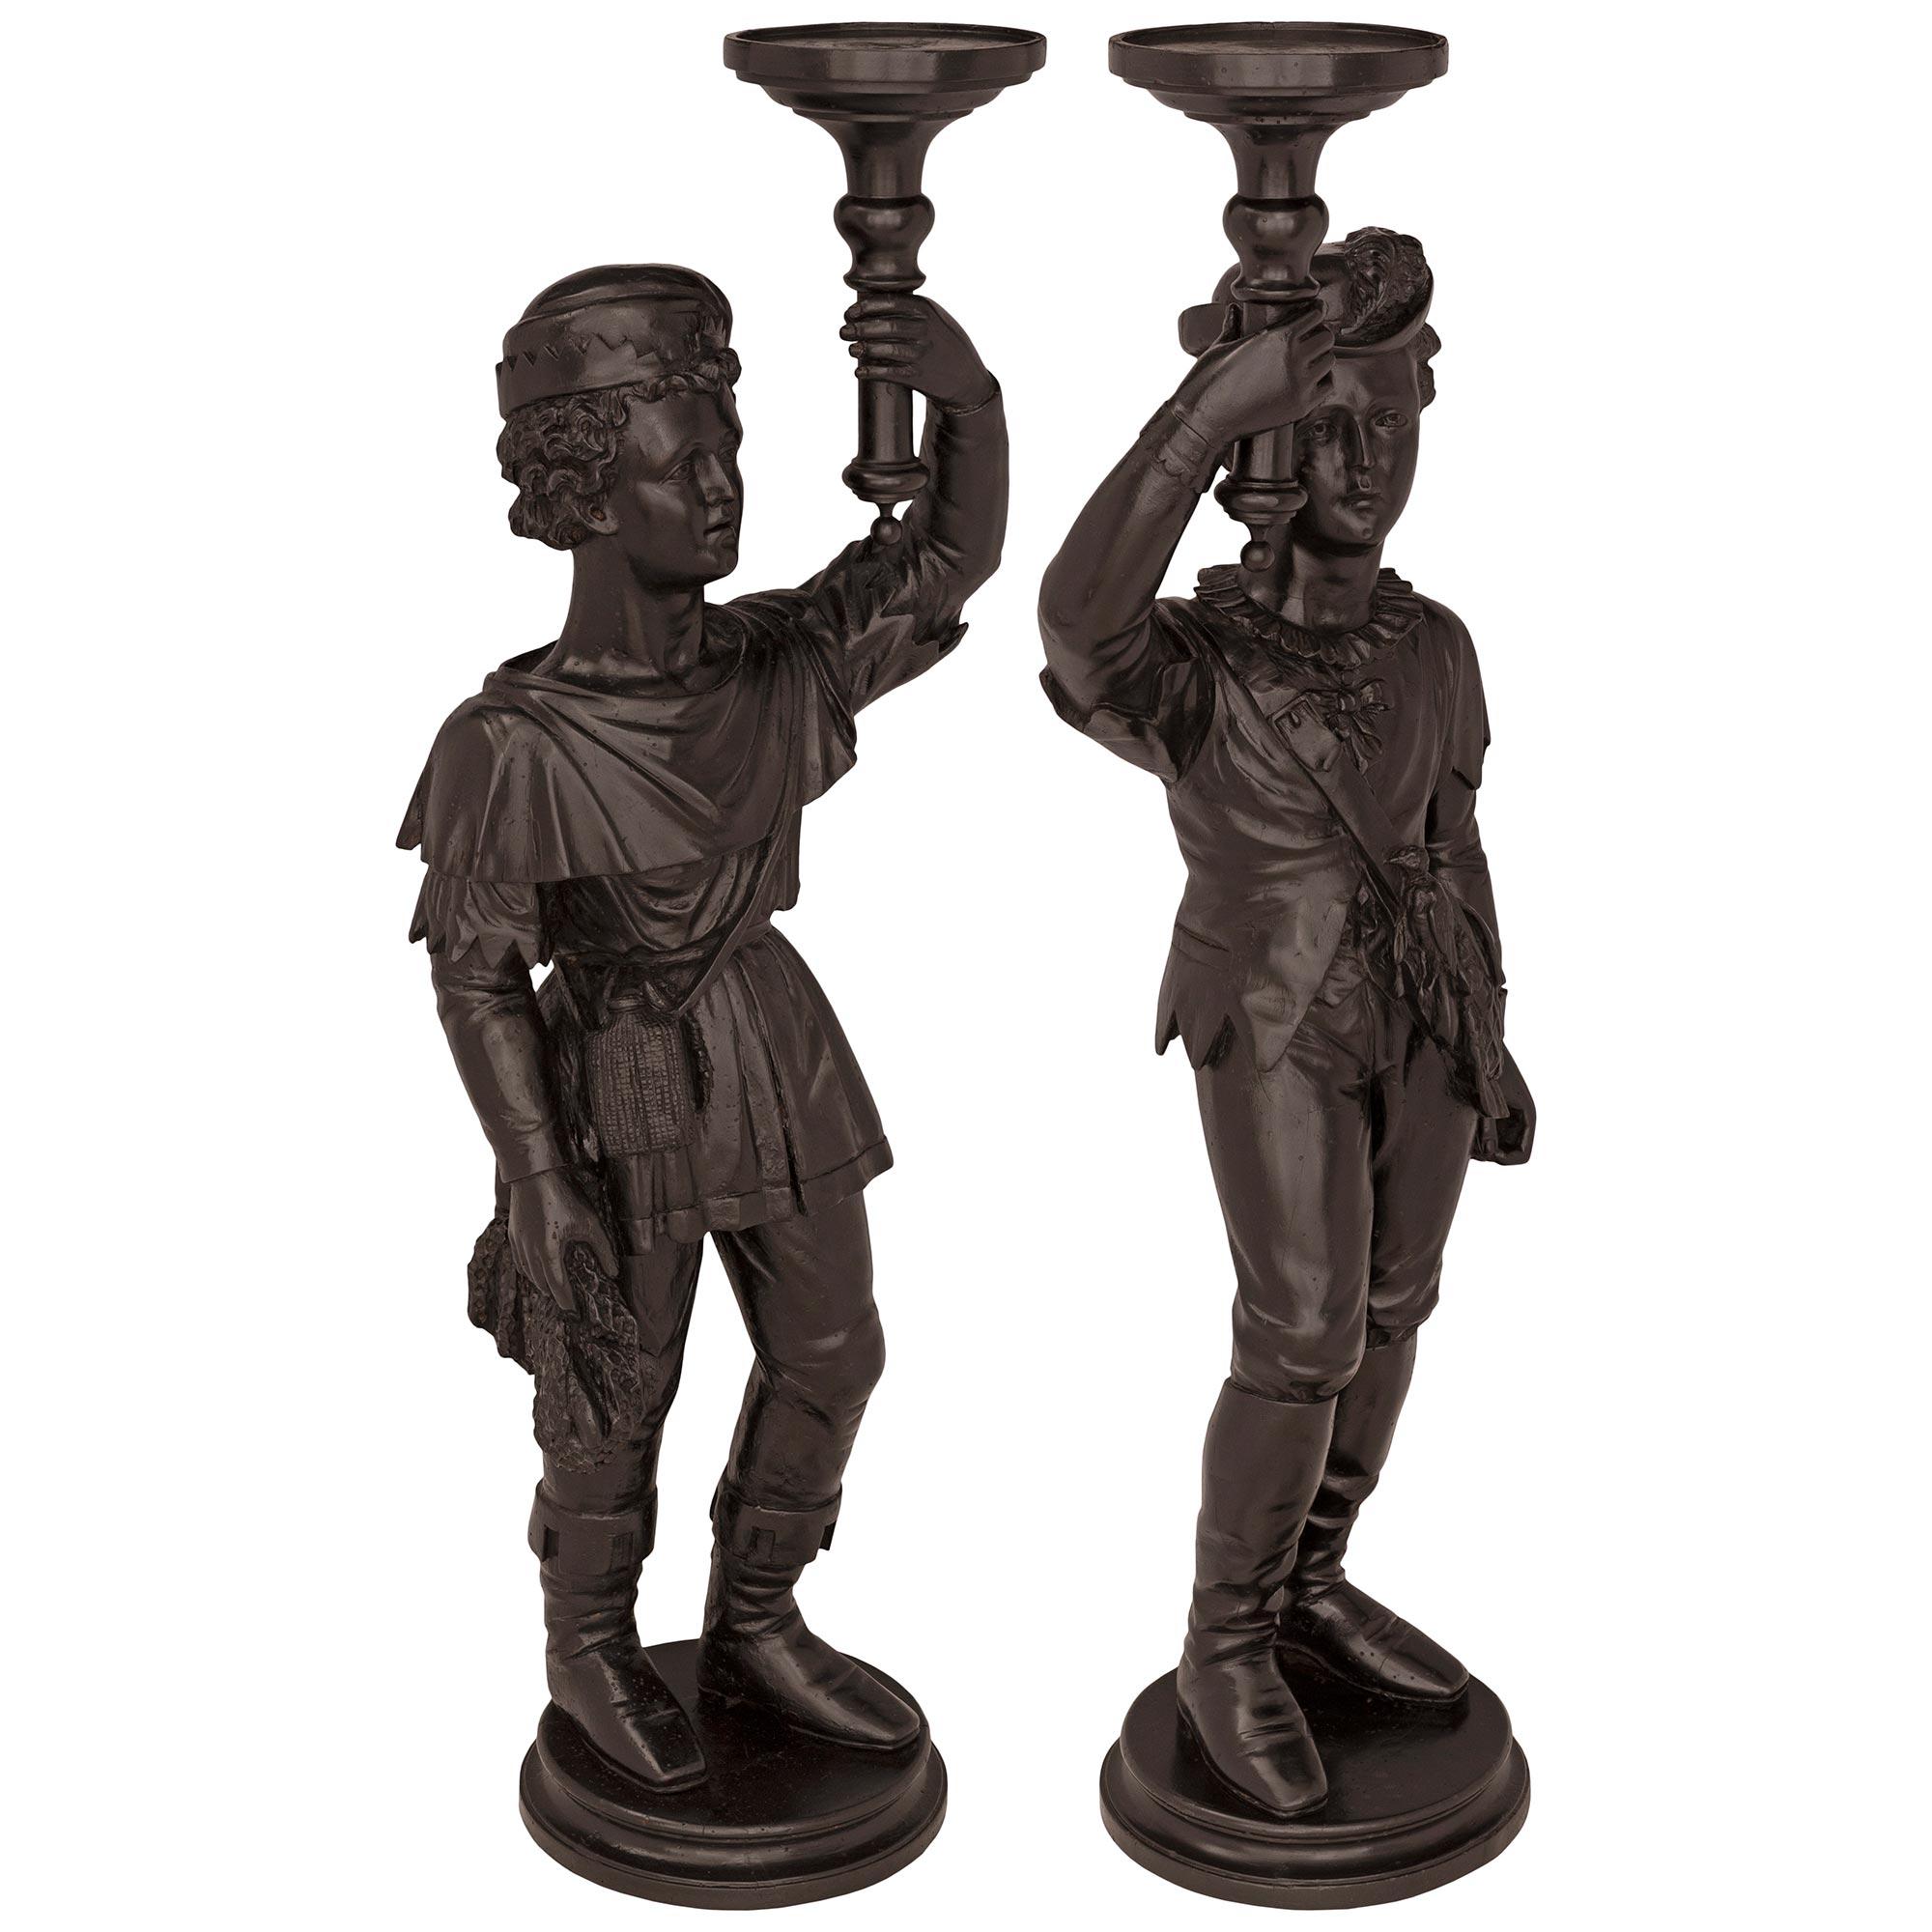 A beautiful and extremely decorative true pair of Italian 18th century Venetian st. ebonized Fruitwood candle/plant stands. Each striking stand depicts a charming young gondolier standing on a circular base with a fine mottled border. Each gondolier